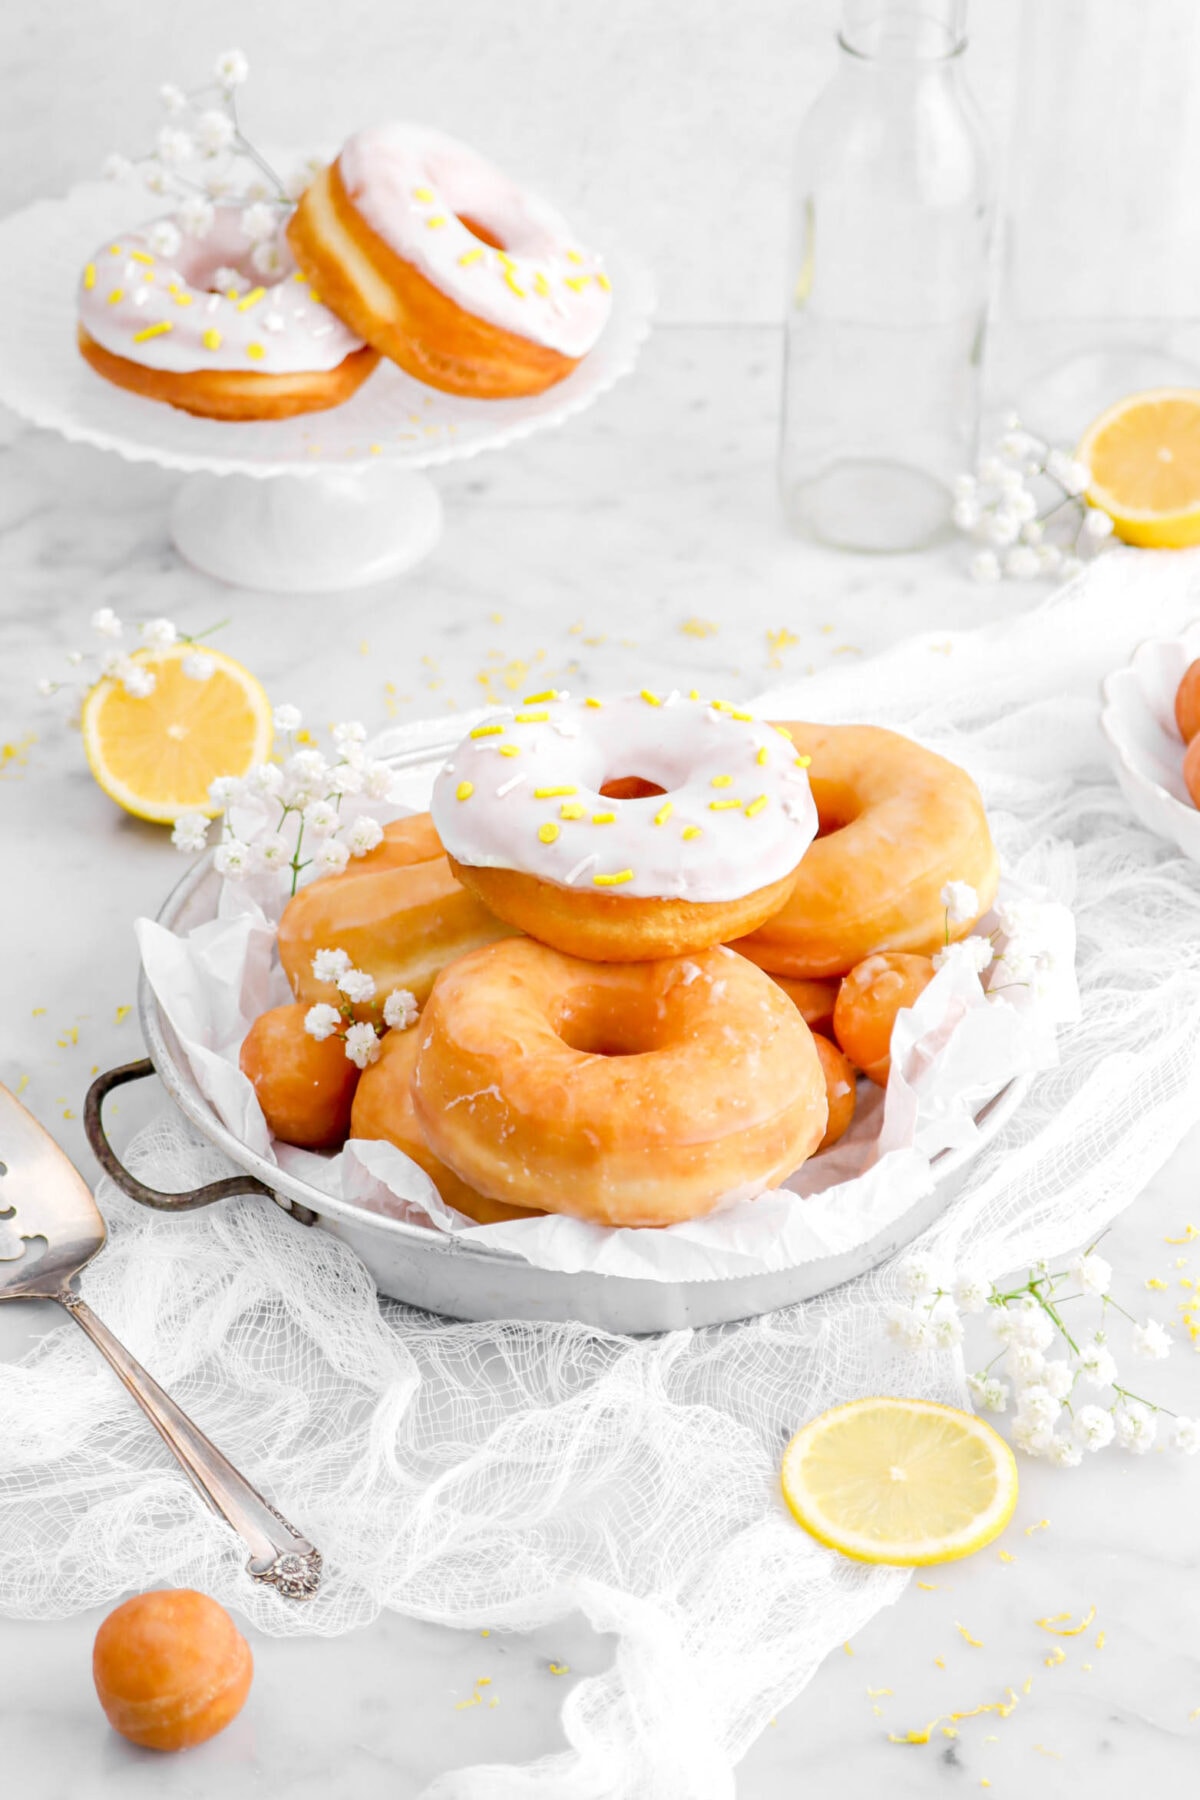 angled shot of doughnuts piled in cake pan on top of a white cheesecloth with lemon halves and white flowers around, and two doughnuts on cake plate behind.